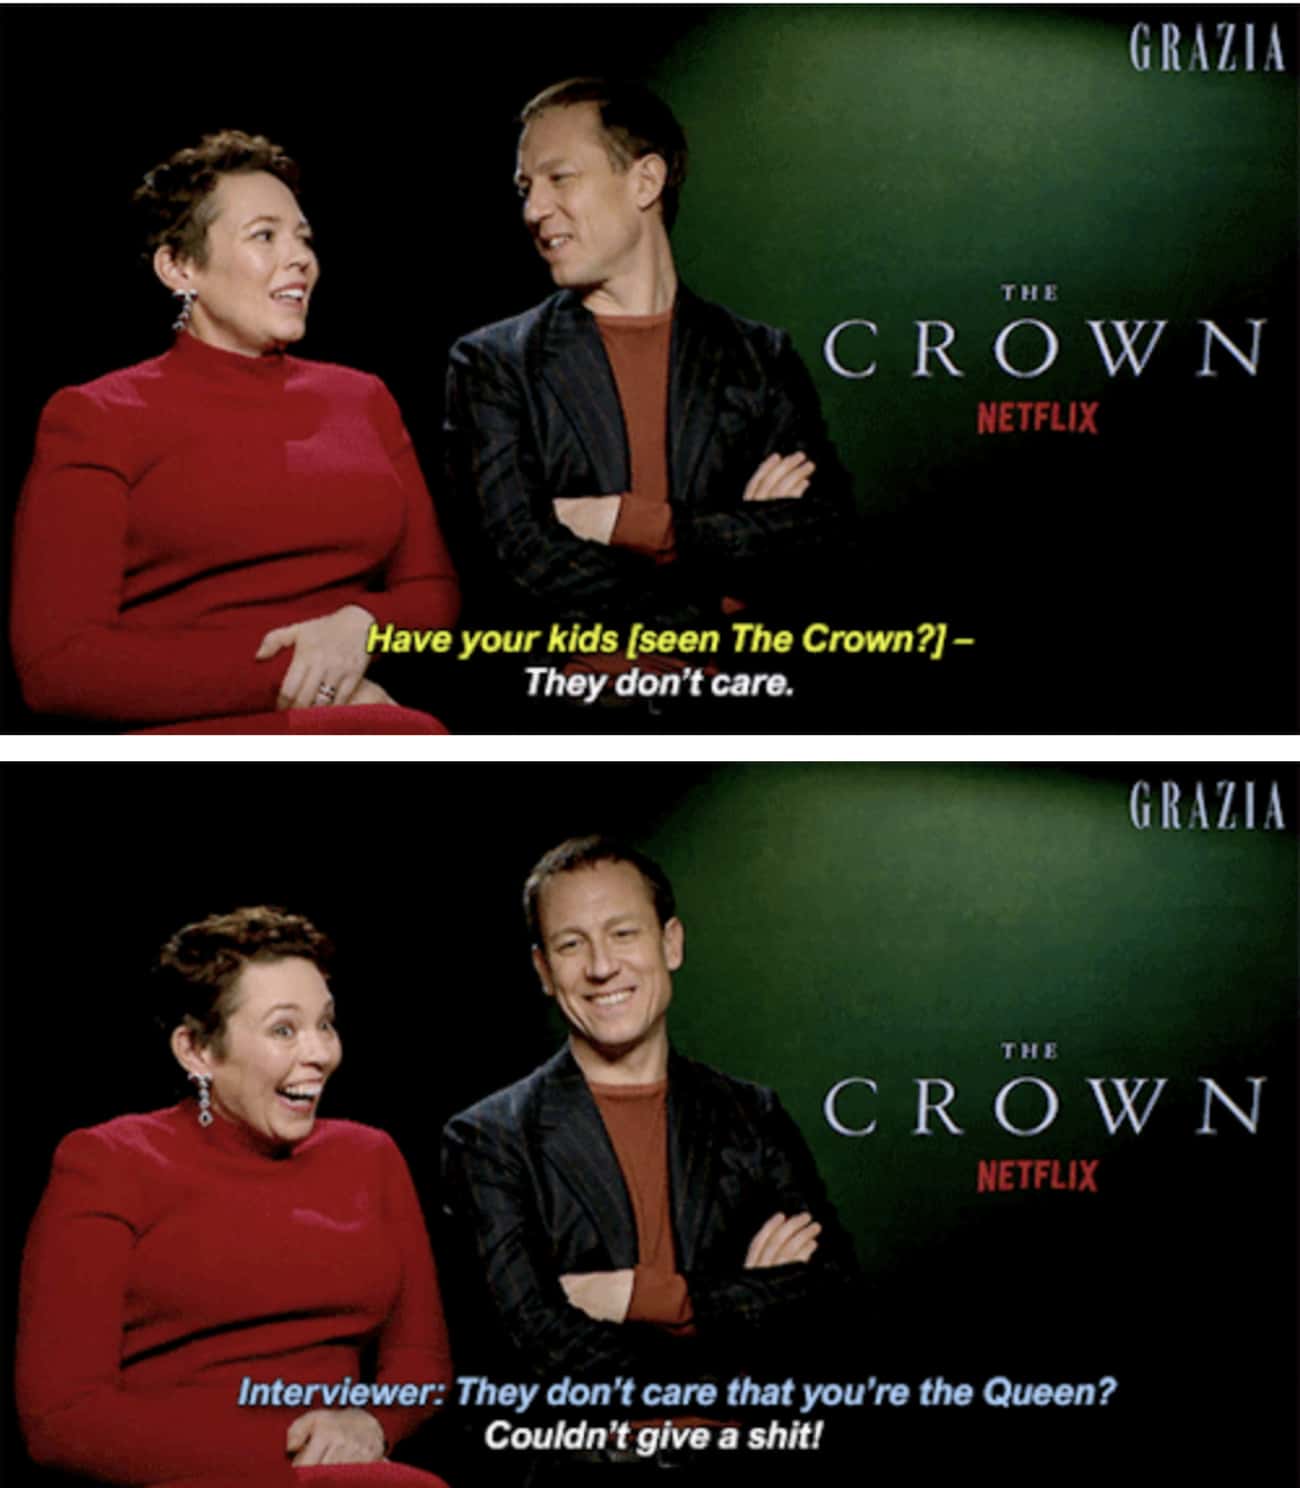 Her Kids Don't Care About 'The Crown'